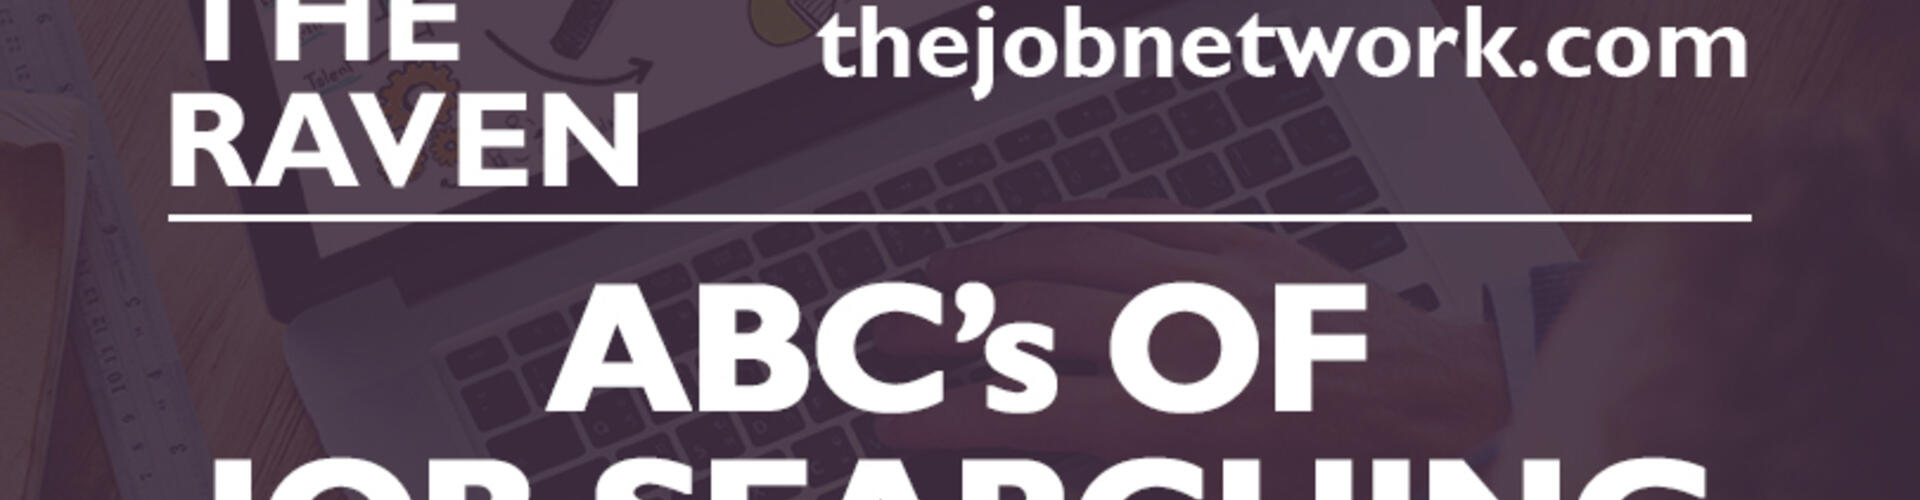 Quote The Raven: The ABC's of Job Searching